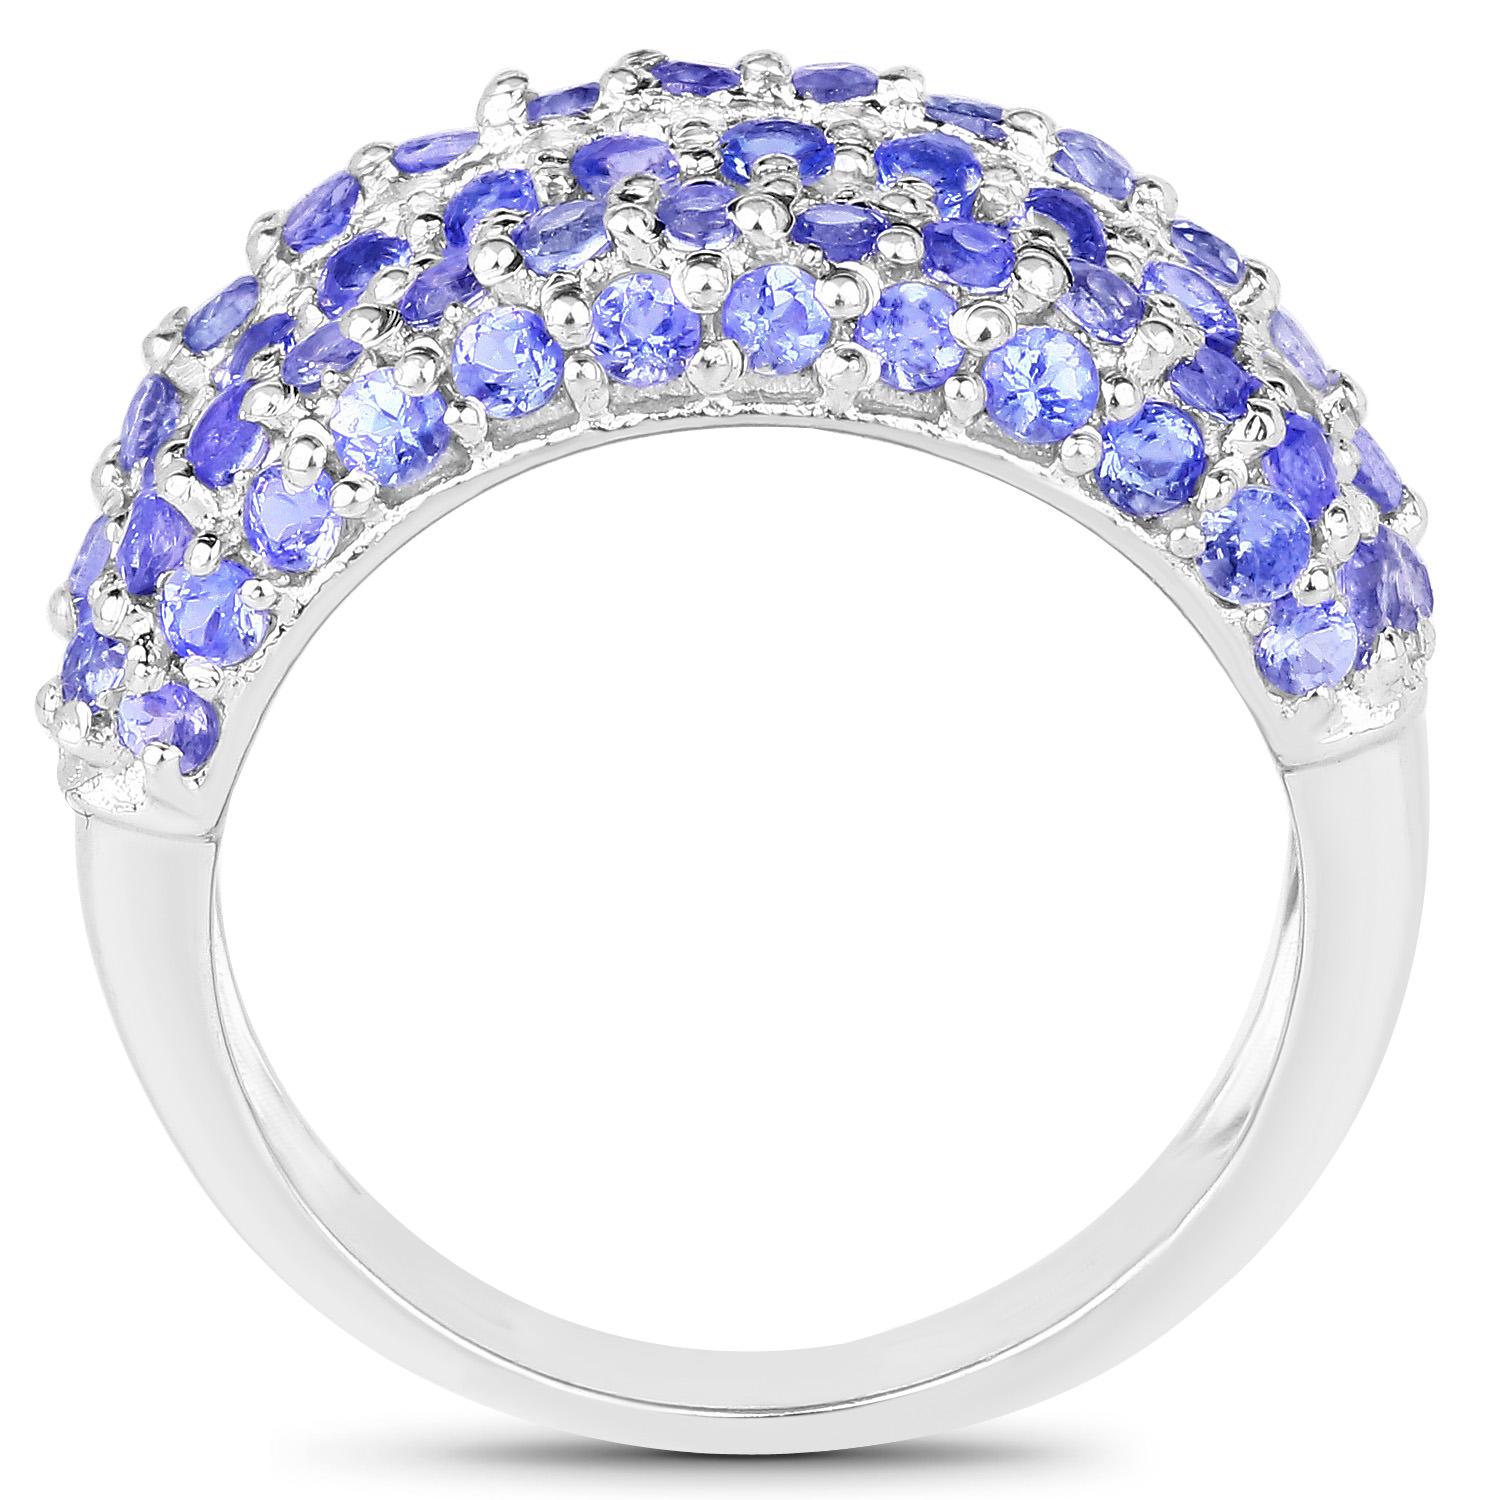 Tanzanite Cluster Ring 2.50 Carats Sterling Silver In Excellent Condition For Sale In Laguna Niguel, CA